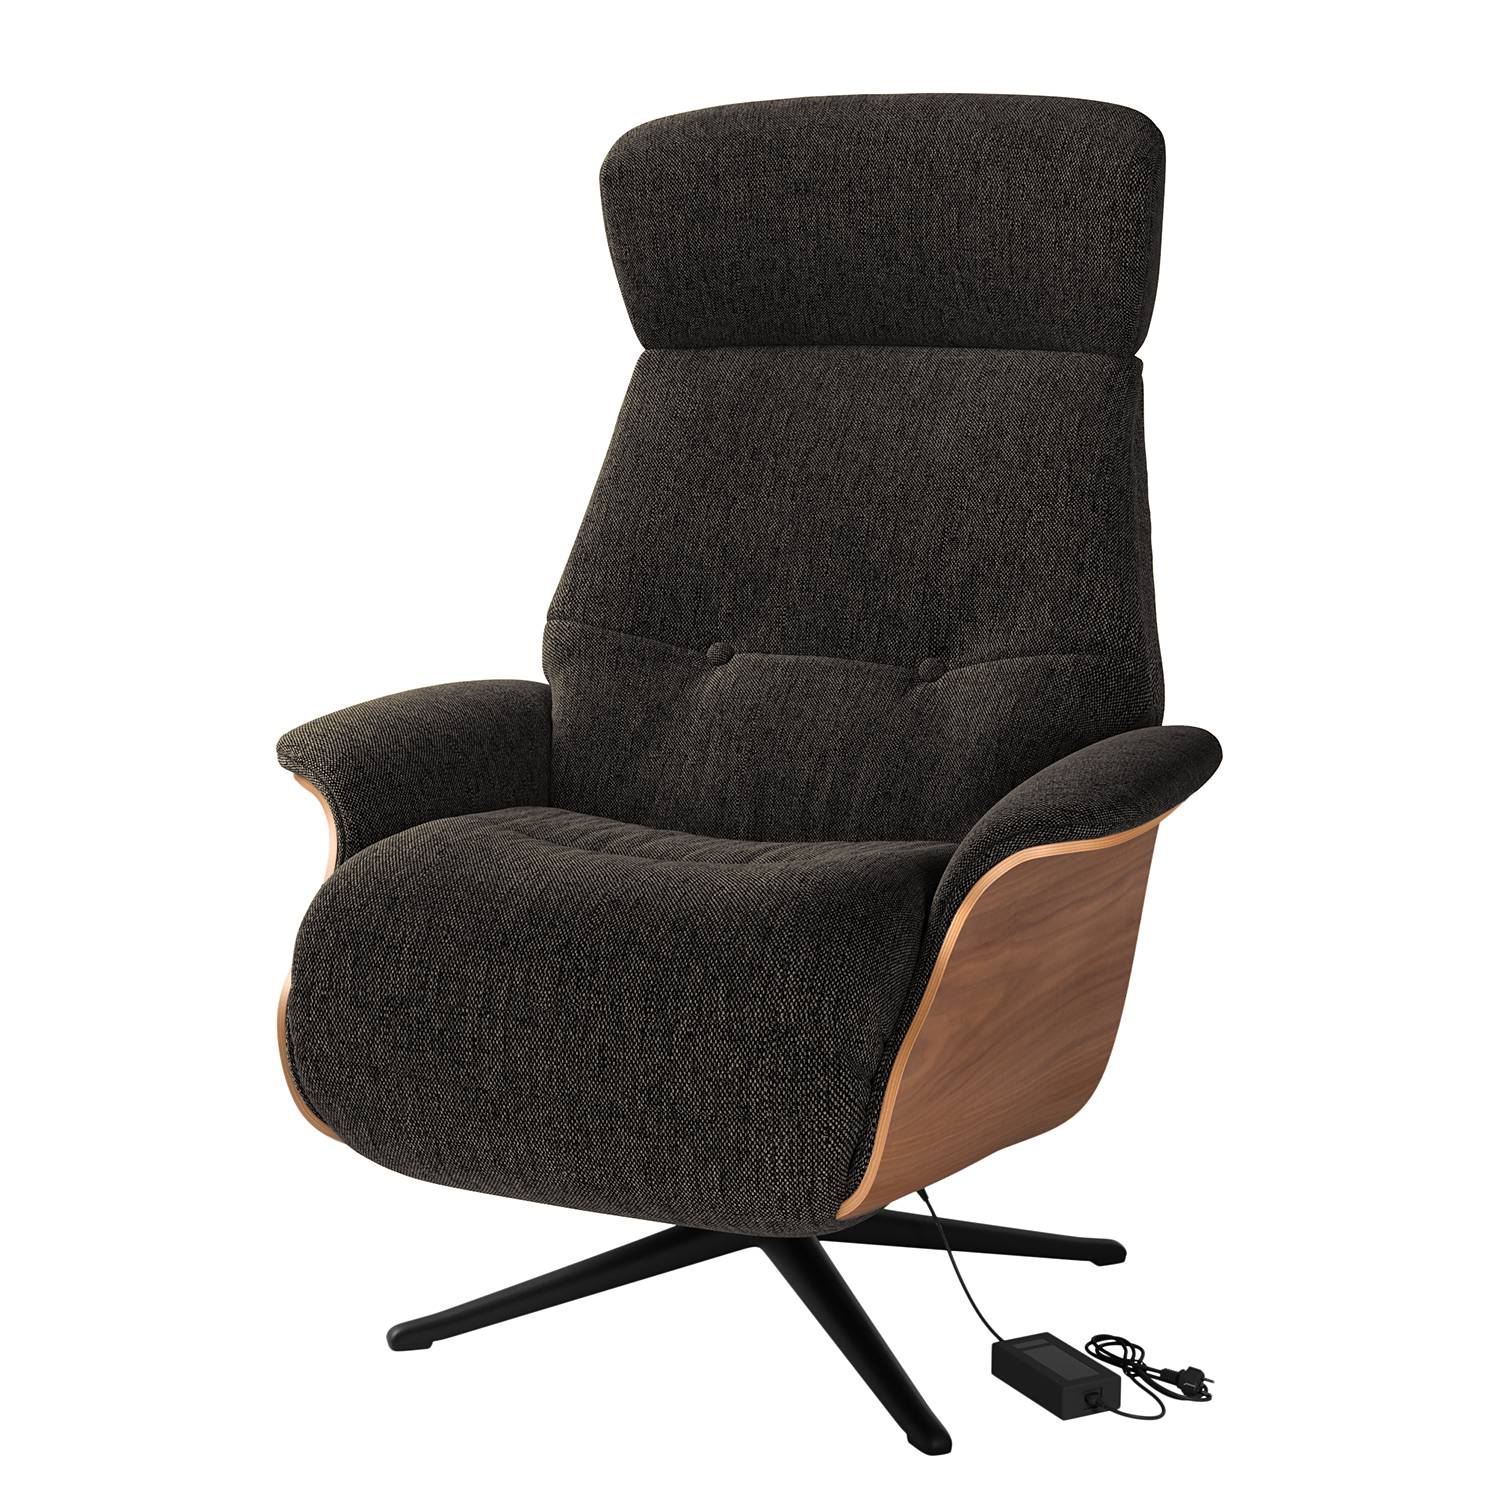 Image of Fauteuil relax Anderson III 000000001000131414